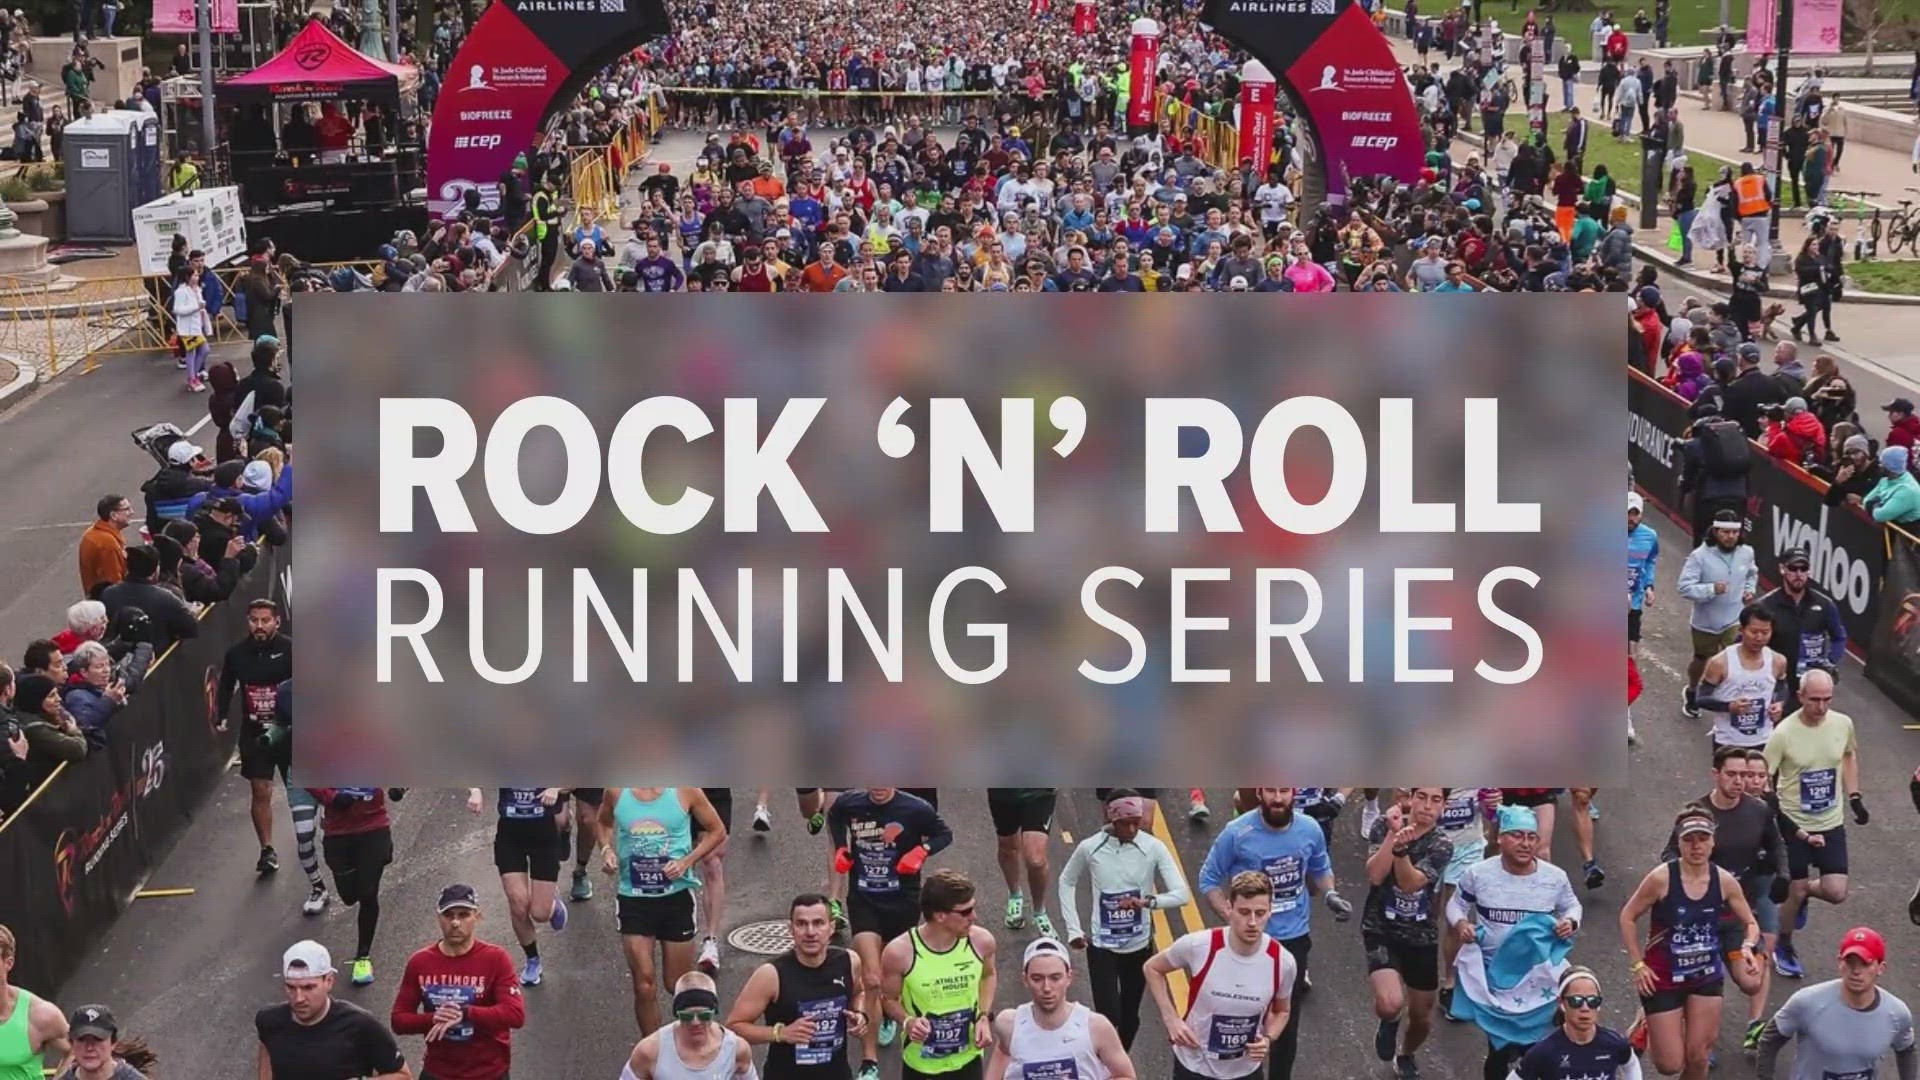 Here are a list of road closures: https://www.wusa9.com/article/news/local/dc/road-closures-2024-rock-n-roll-half-marathon-and-5k/65-59ab9302-8a29-499e-9021-3c233155